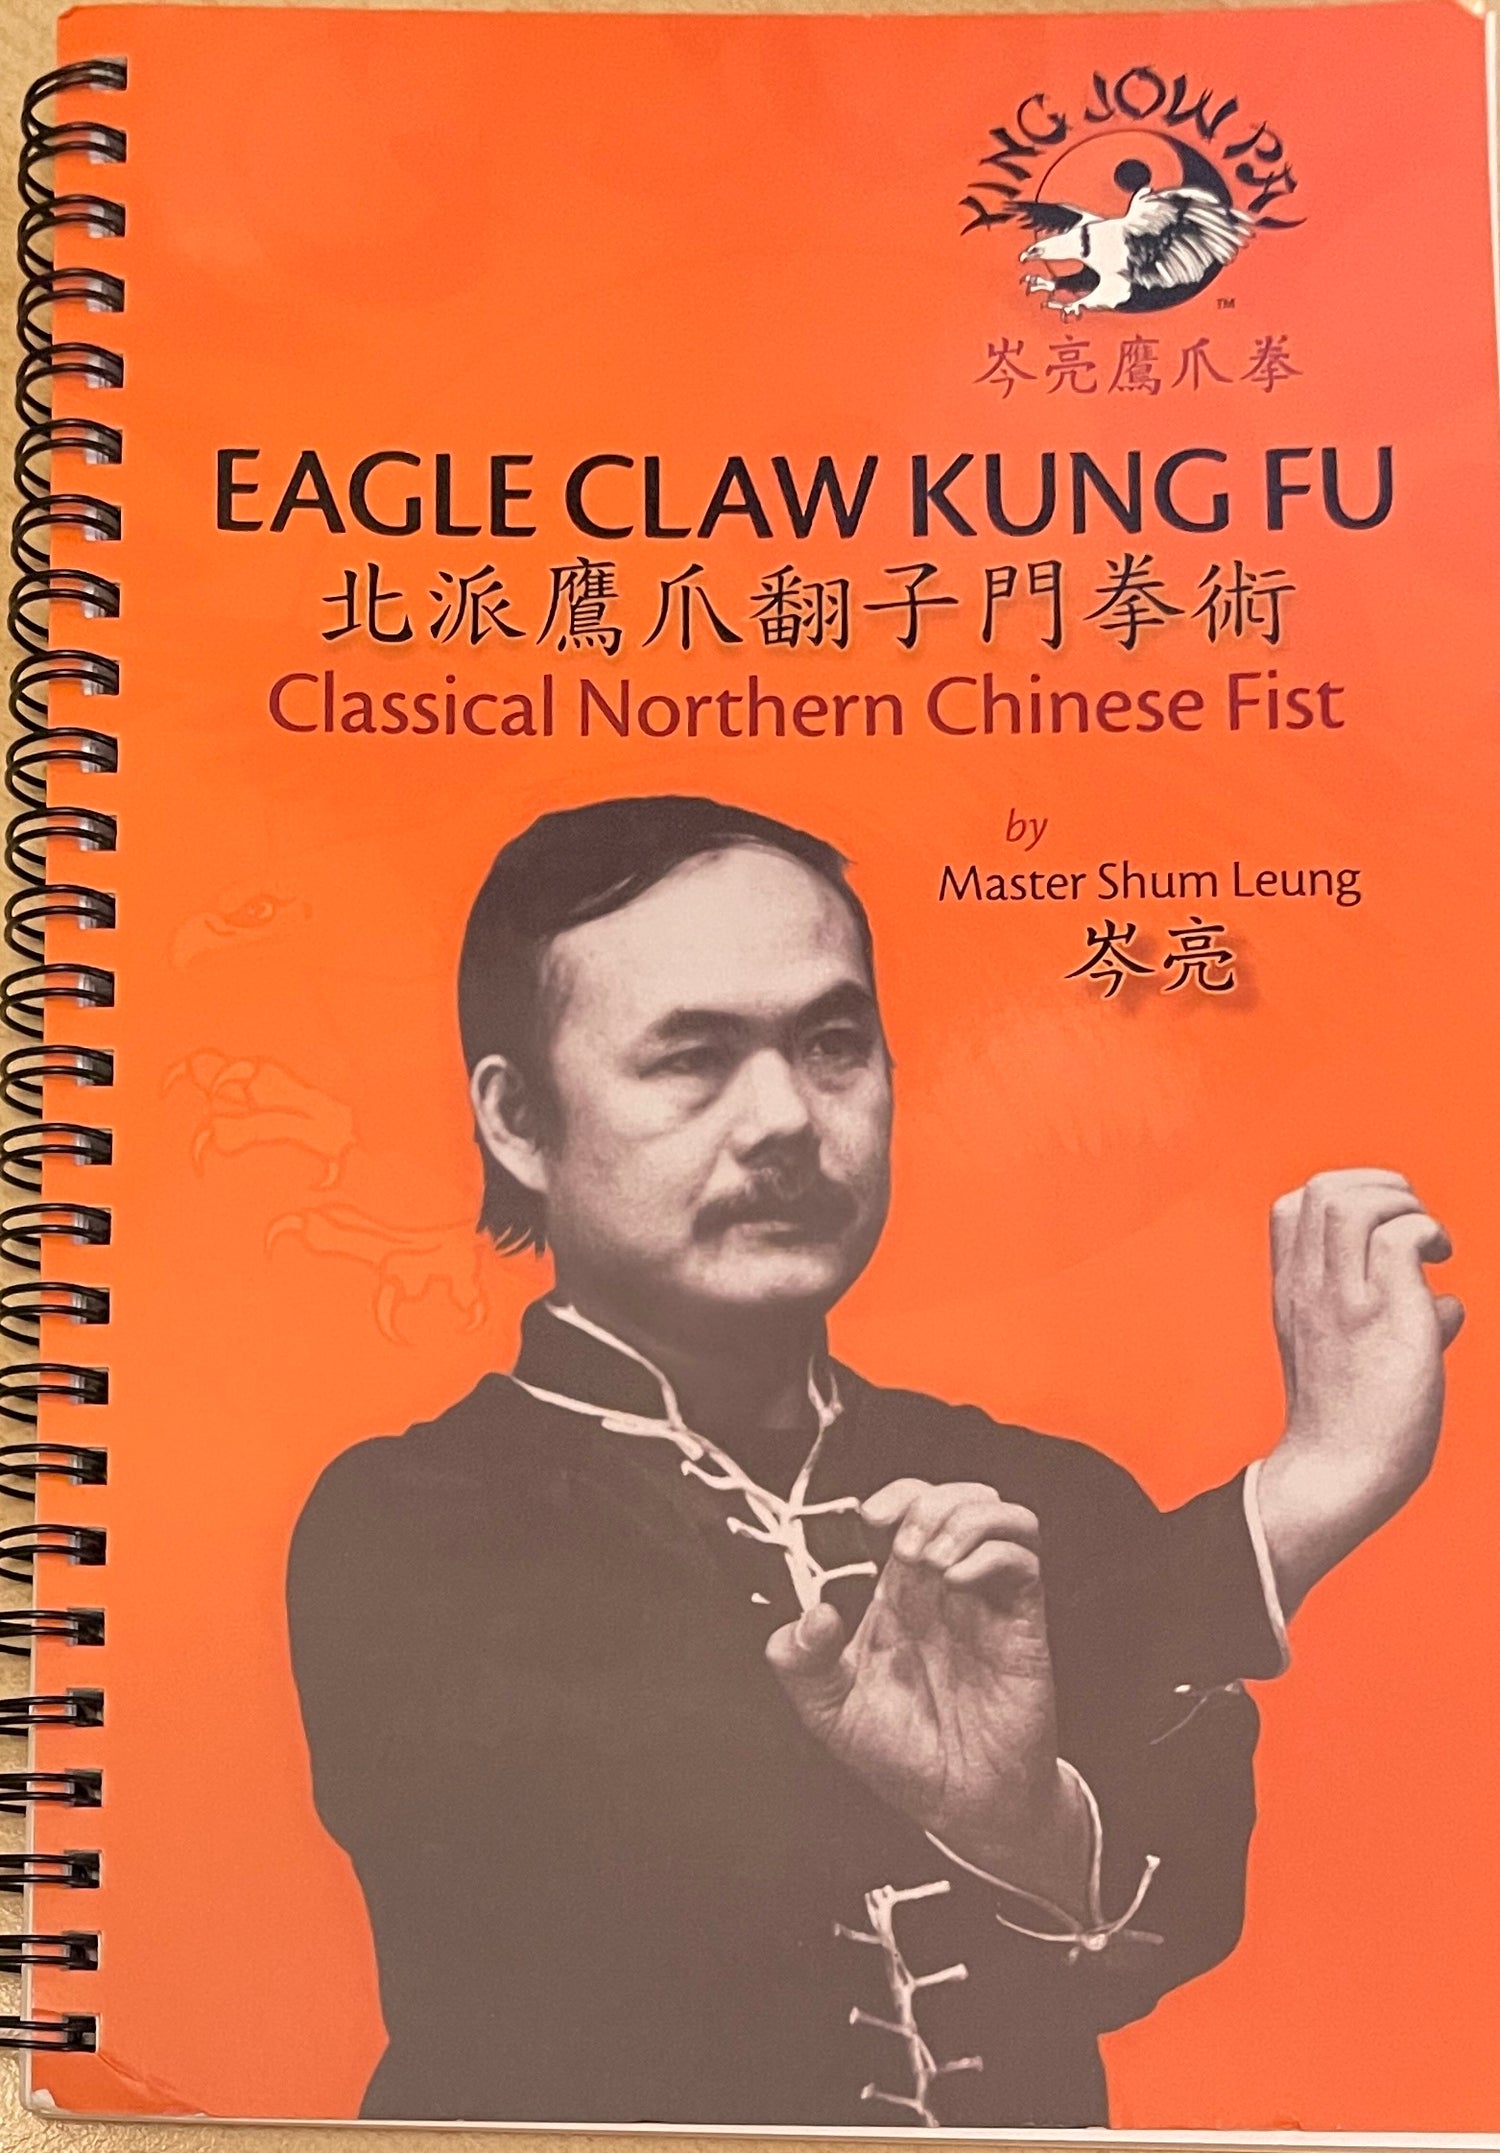 Eagle Claw Kung Fu: Classical Northern Chinese Fist Book by Shum Leung 2020 Edition (Preowned)